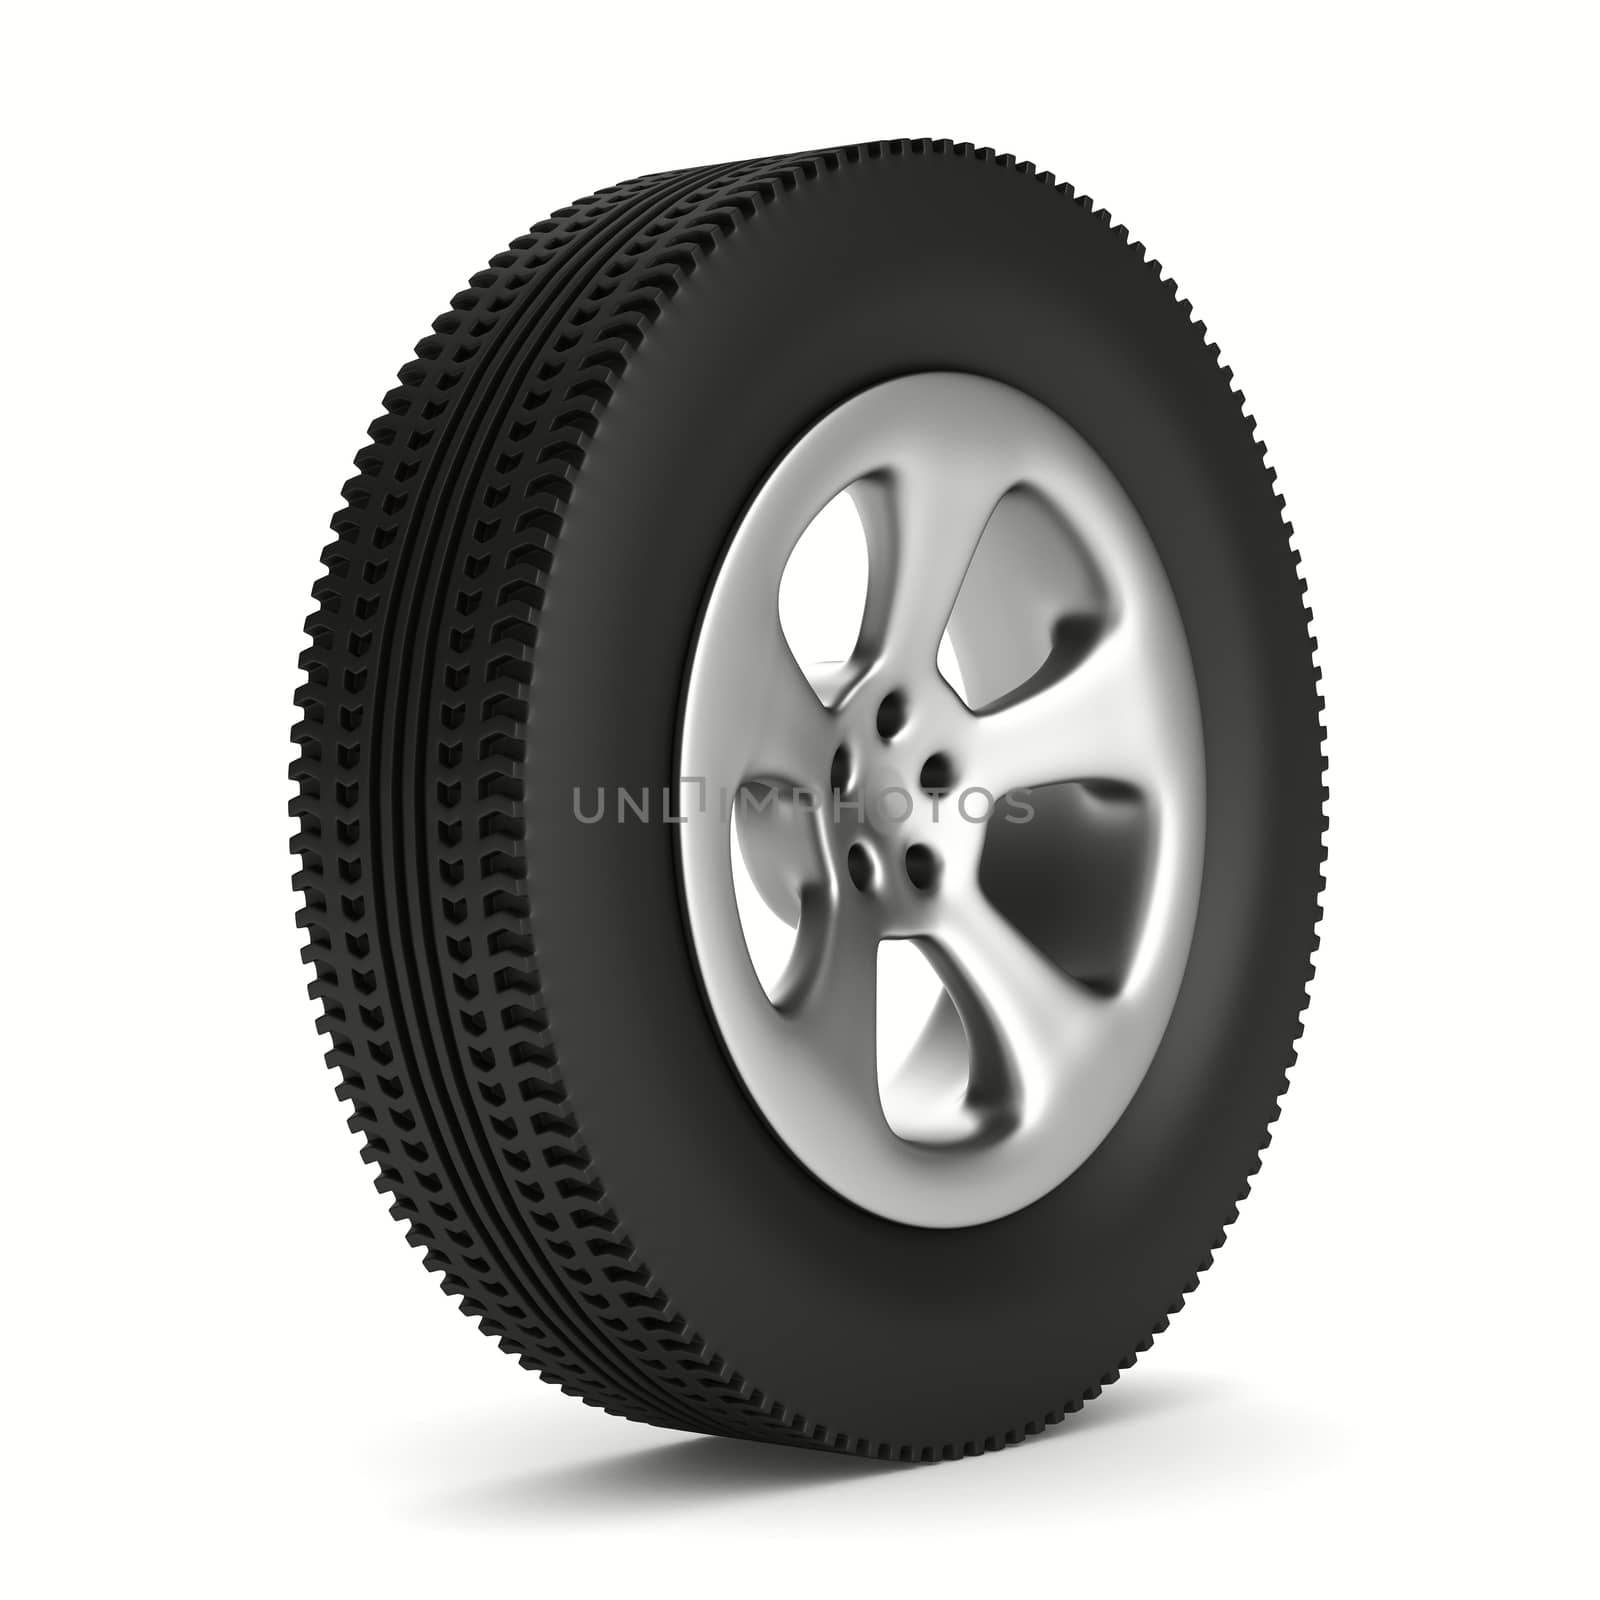 disk wheel on white background. Isolated 3D image by ISerg